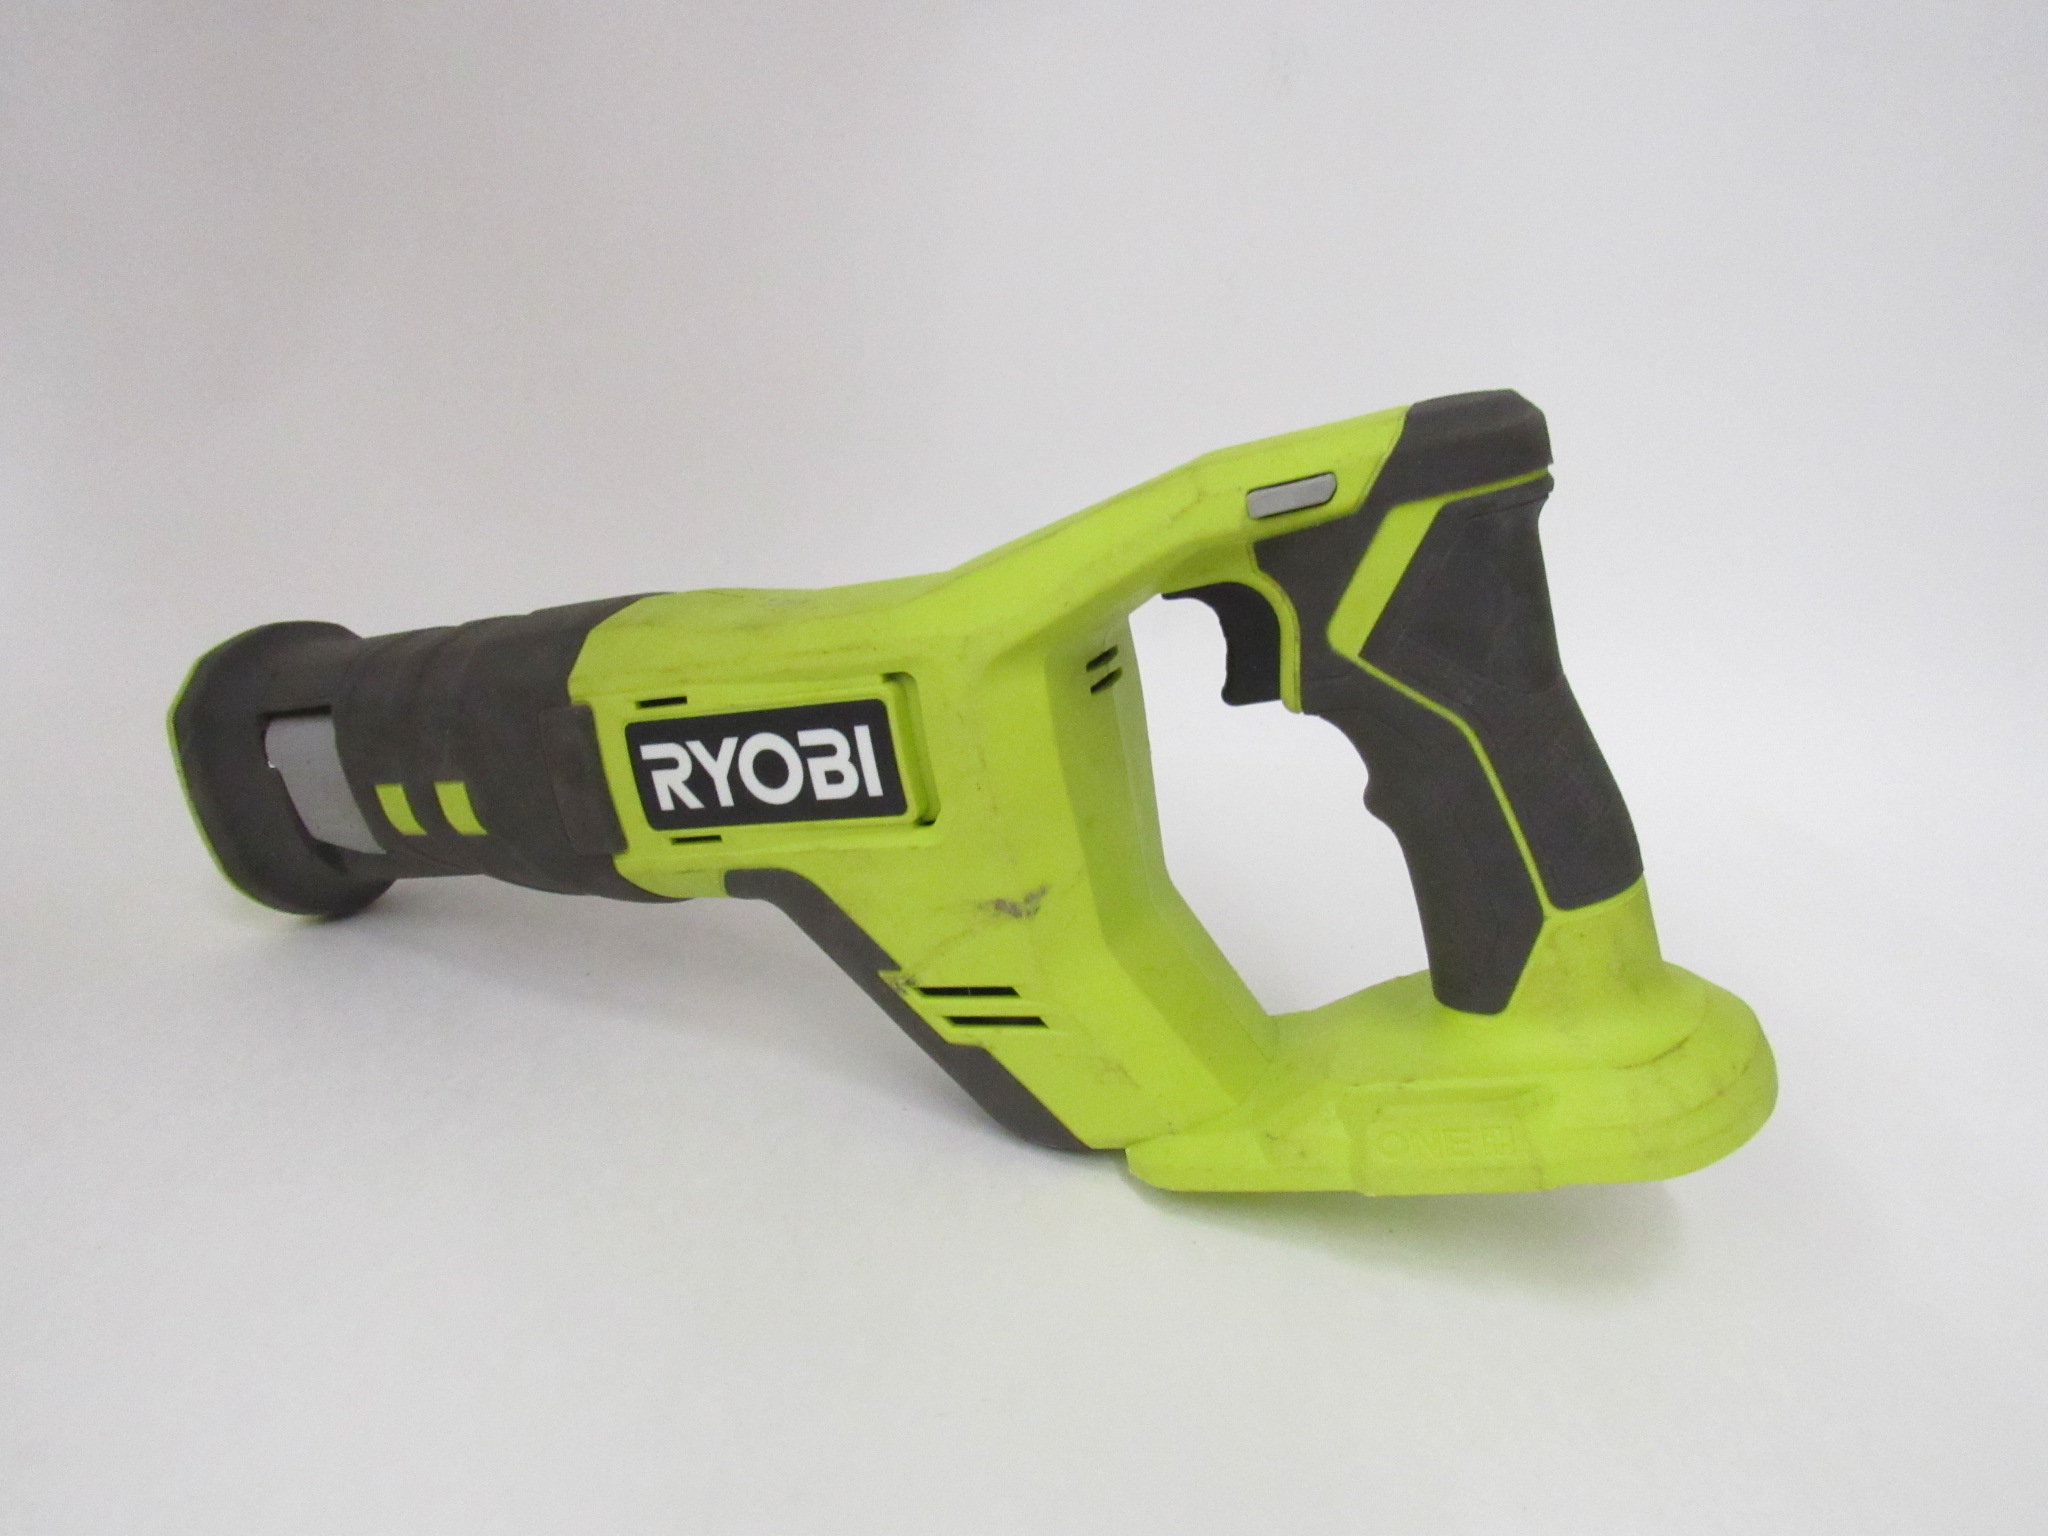 Ryobi PCL515 18-Volt ONE+ Cordless Reciprocating Saw Tool Only